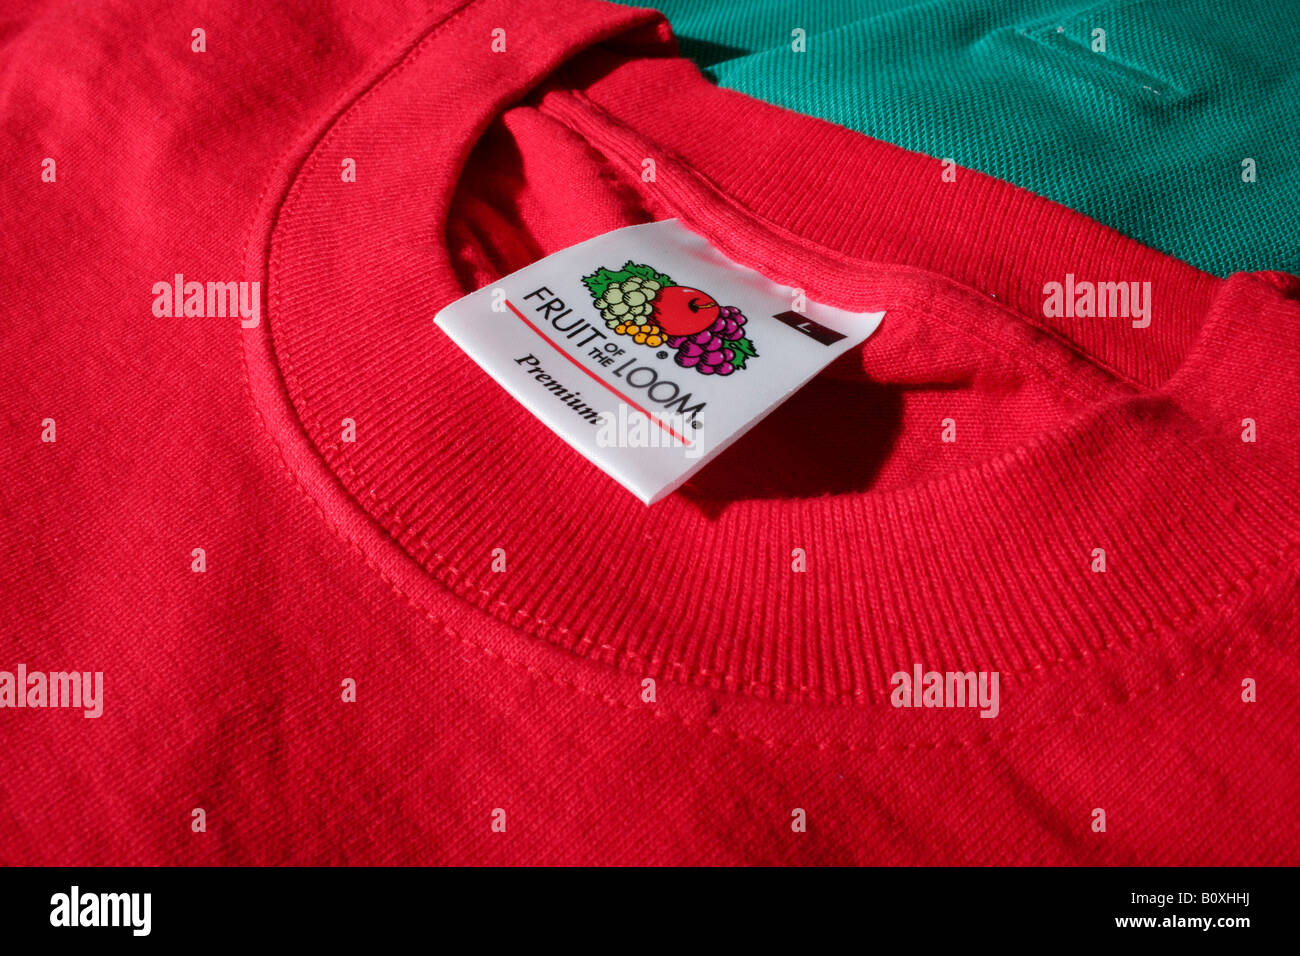 Fruit of the Loom t-shirt Stock Photo - Alamy